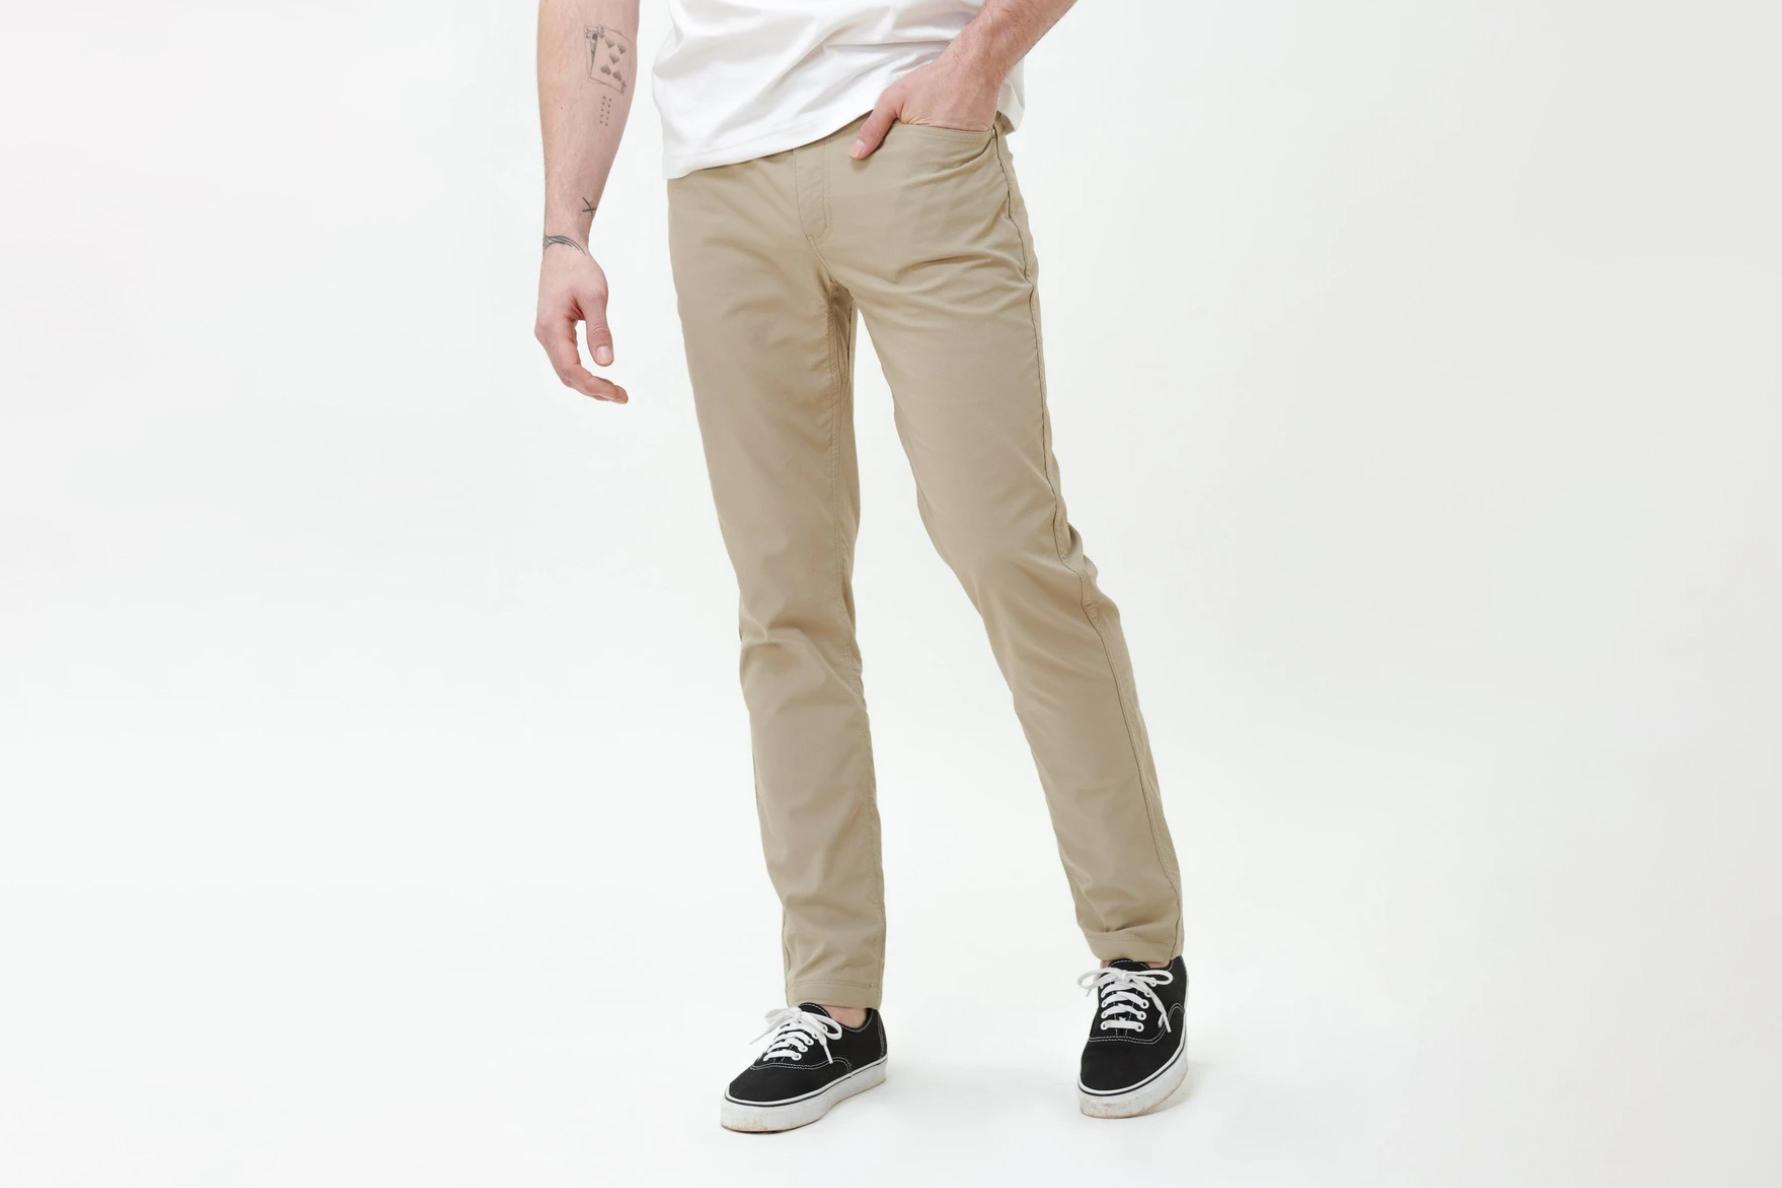 Men's Airplane Travel Pant made with Organic Cotton | Pact